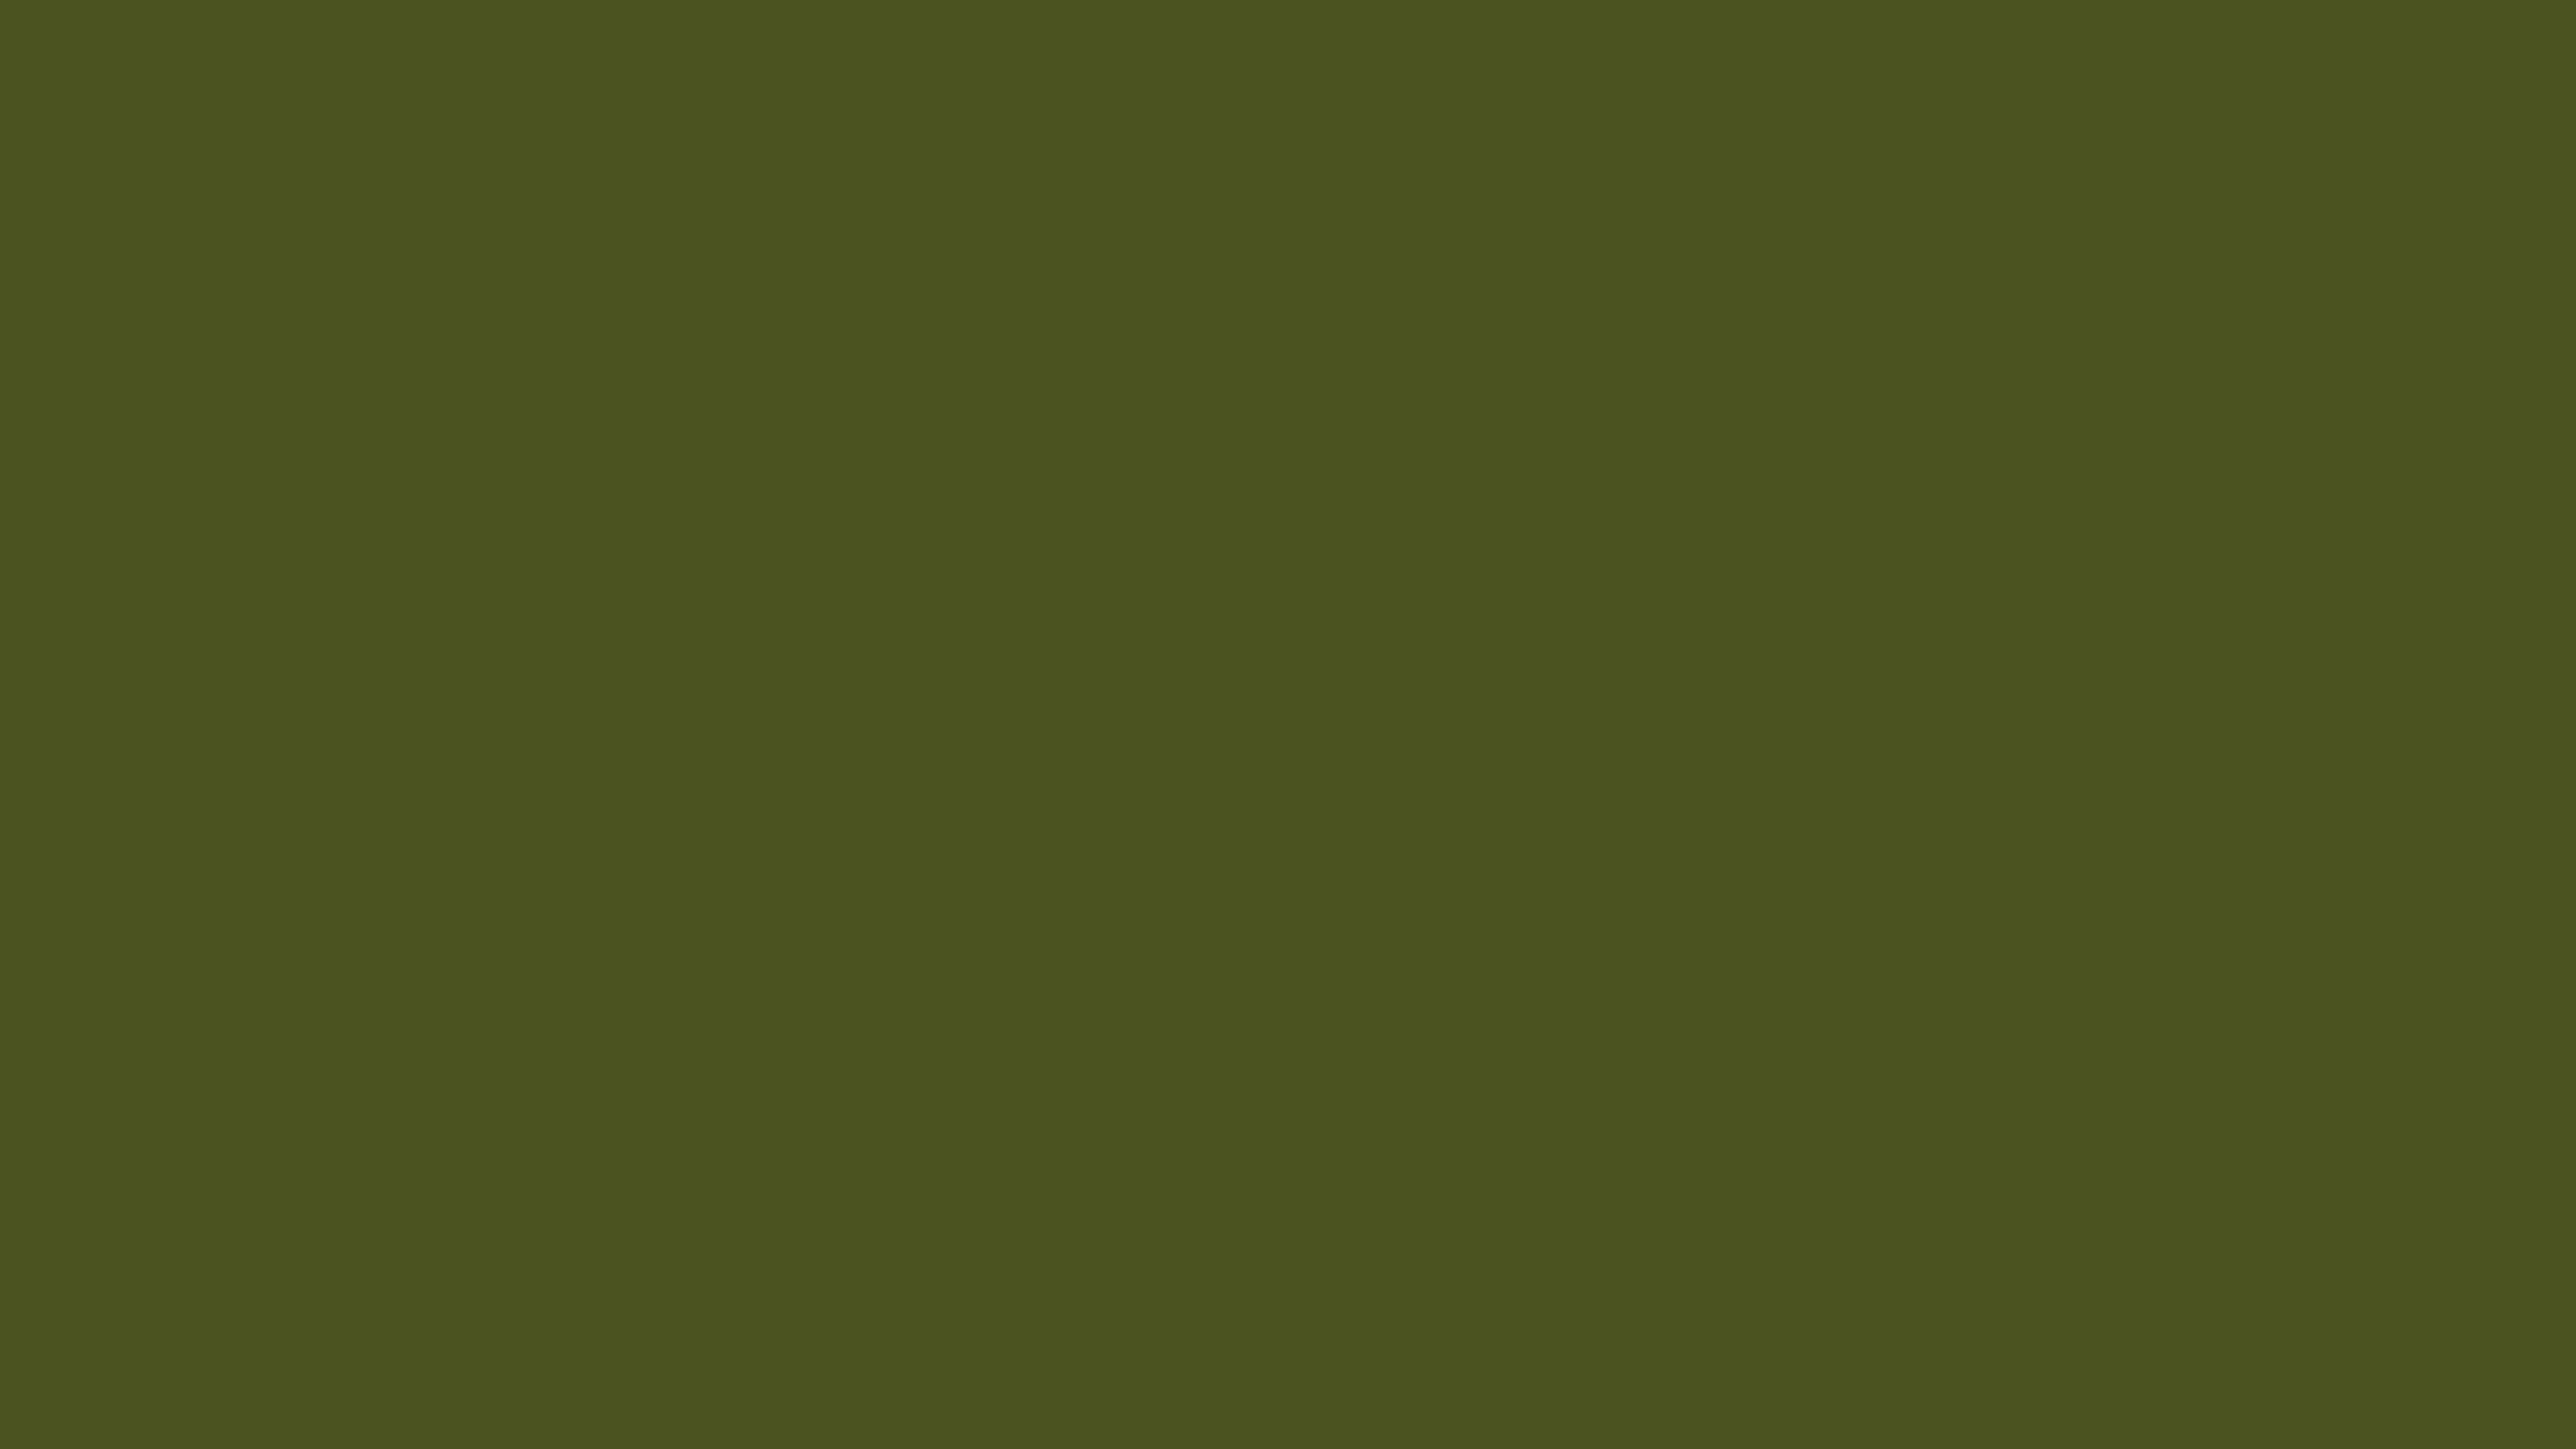 4096x2304 Army Green Solid Color Background